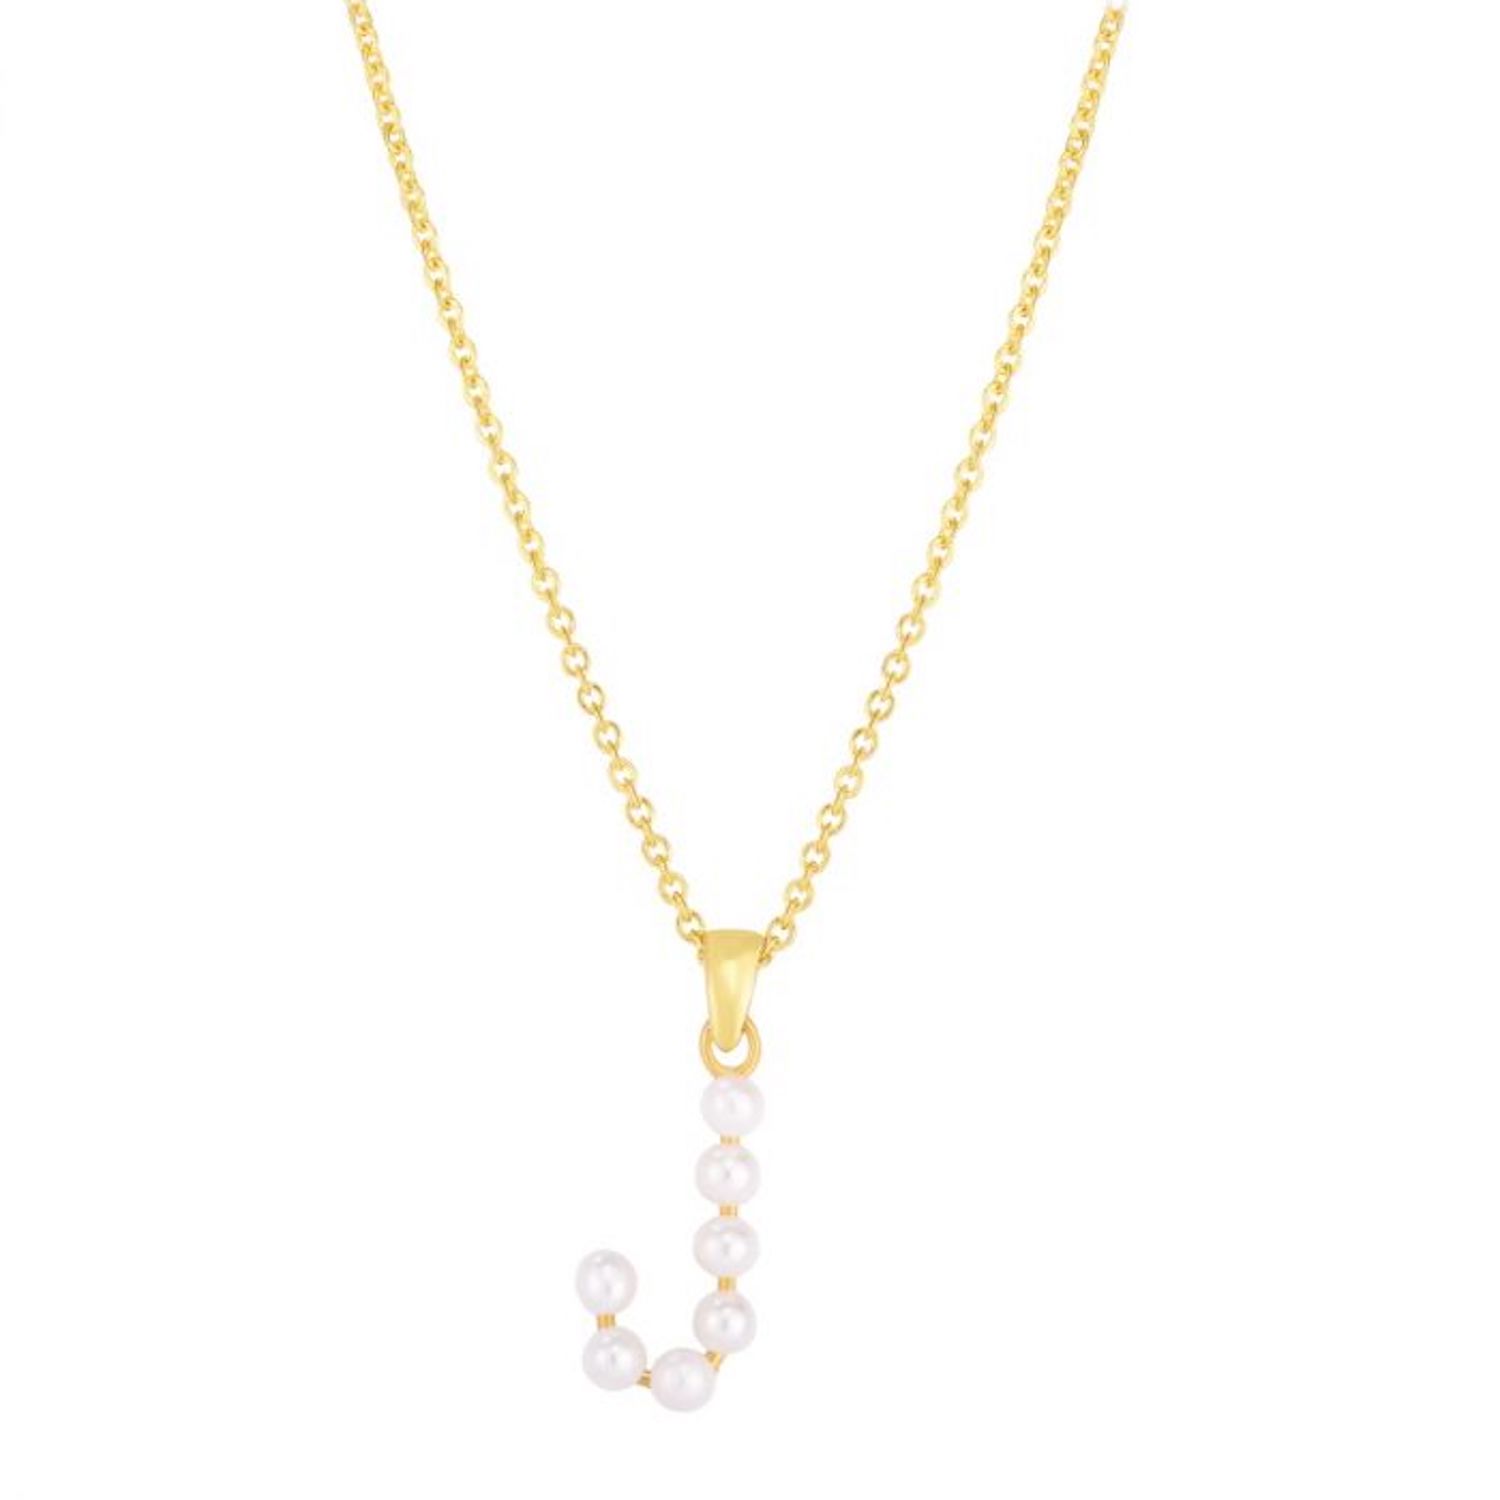 14K Yellow Gold Cultured Pearl Initials Letter Pendant Necklace 18" - J